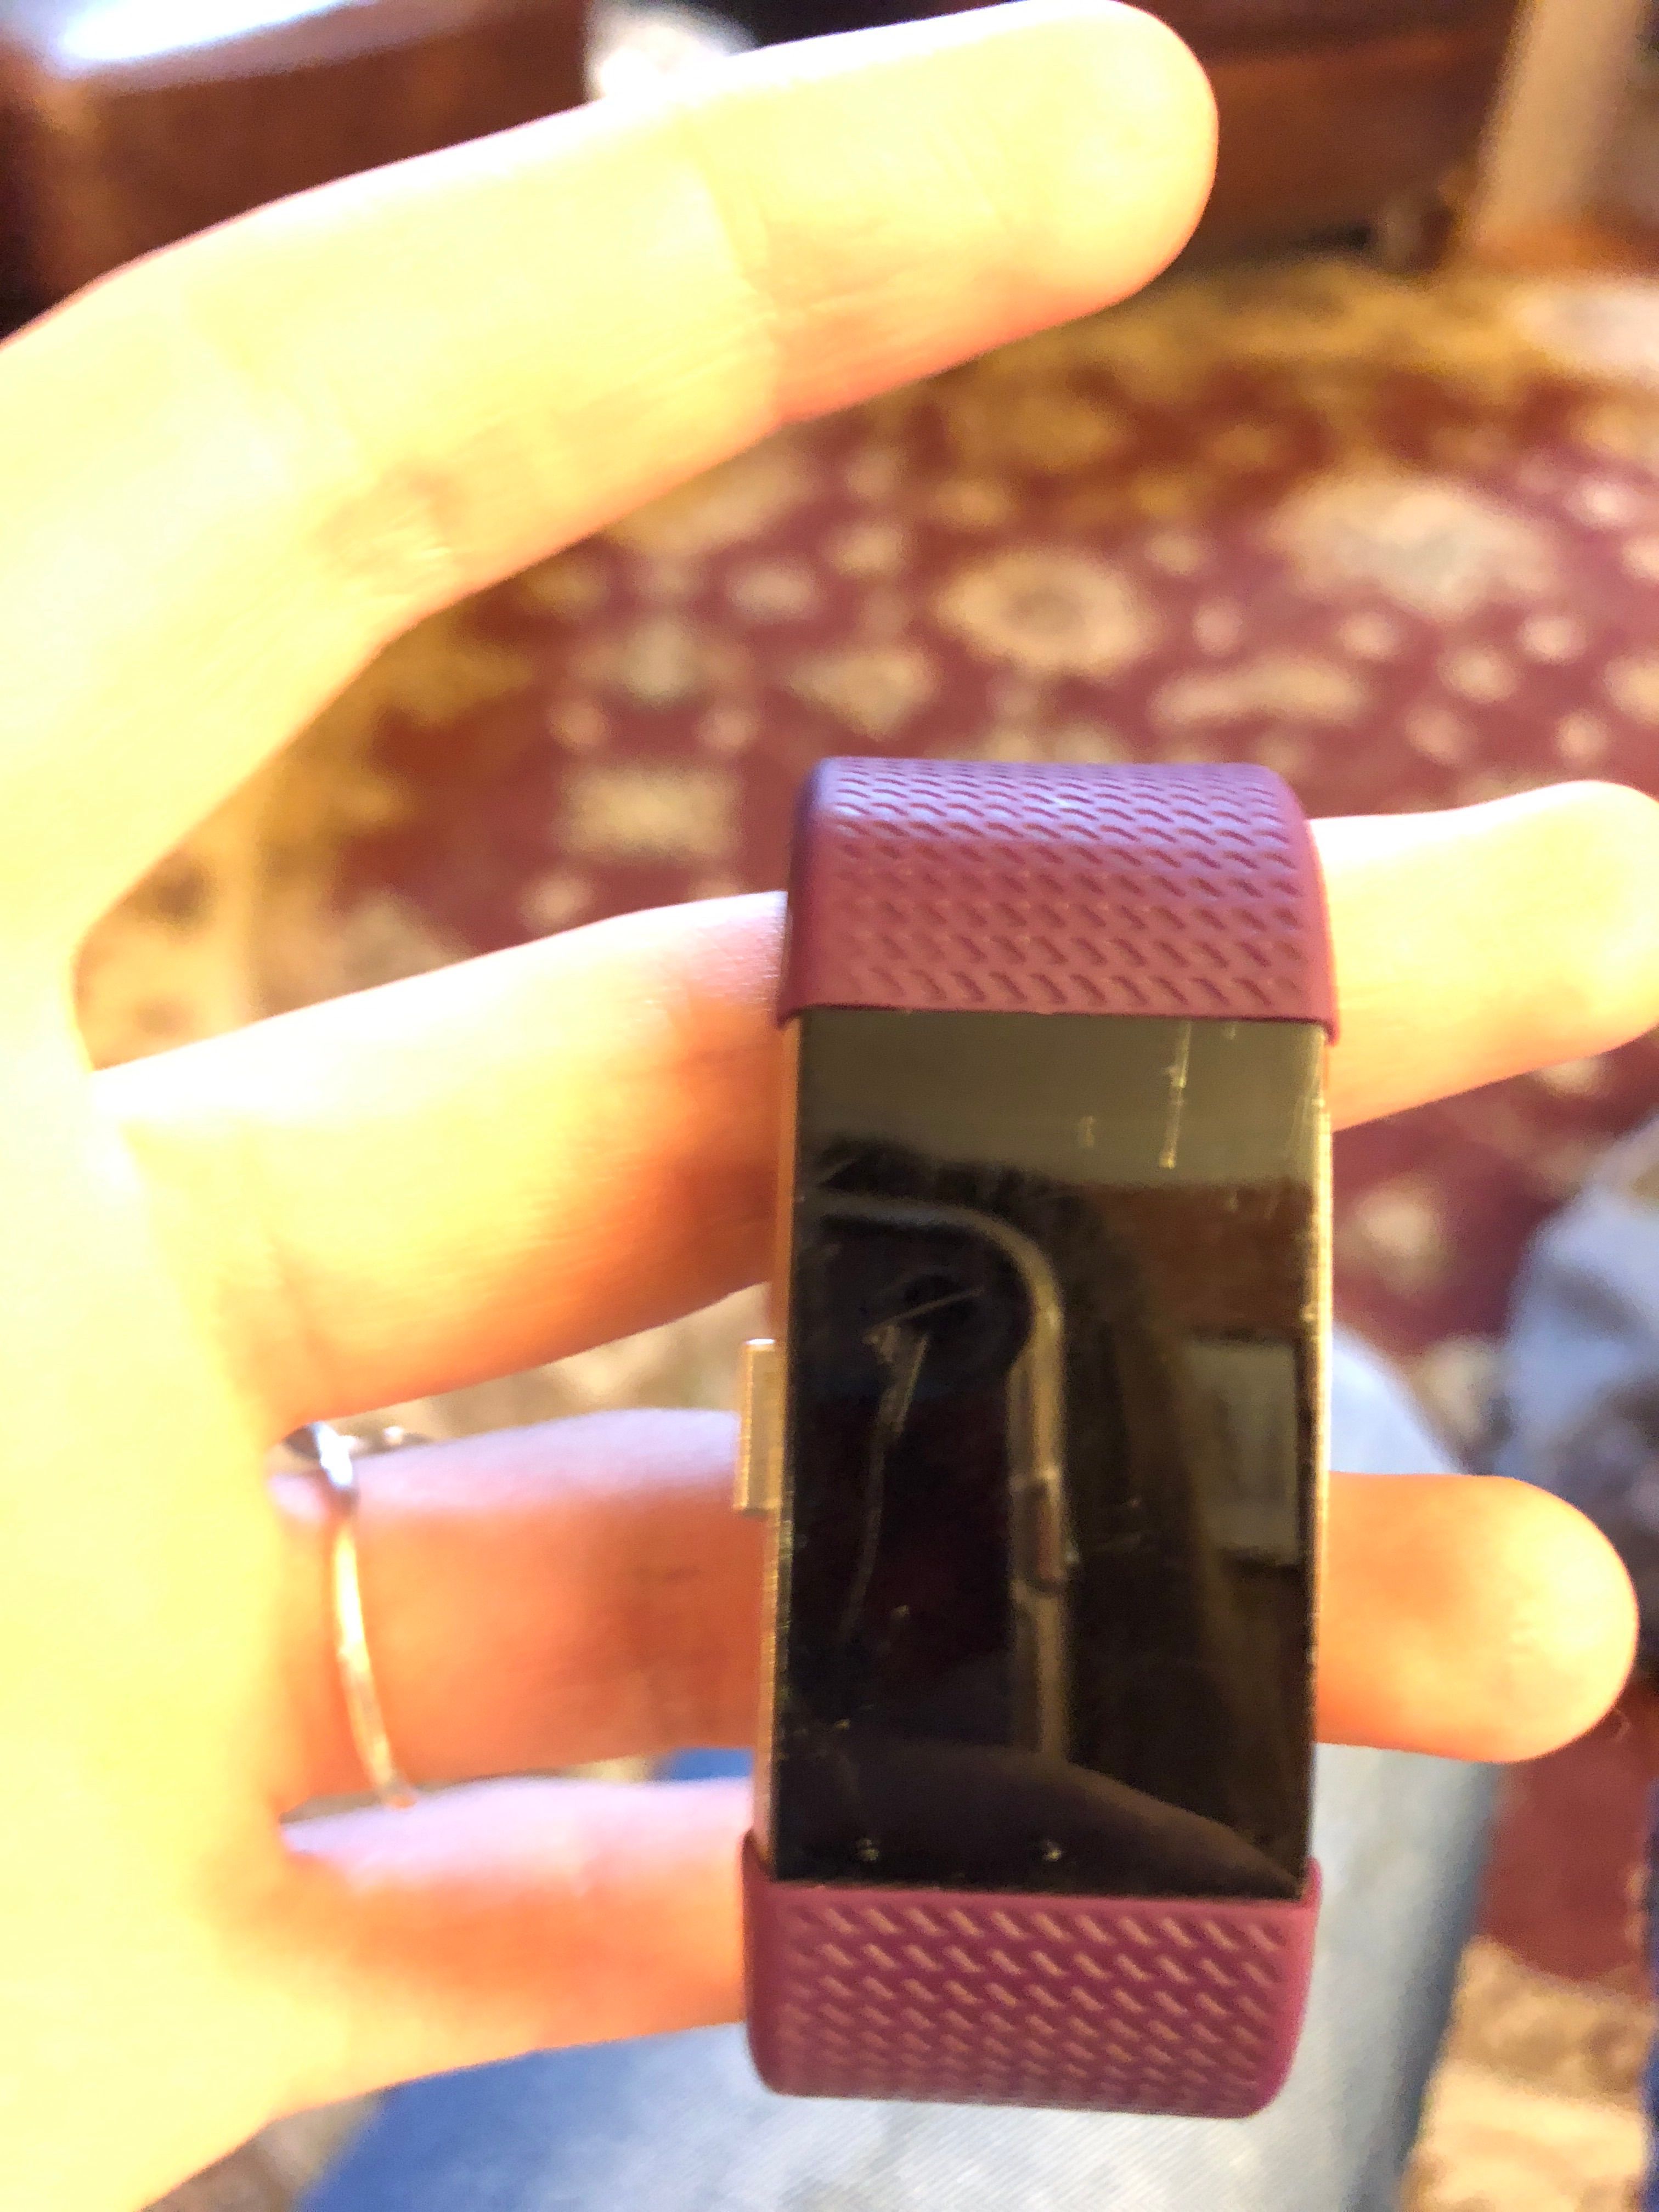 fitbit charge 2 cracked screen